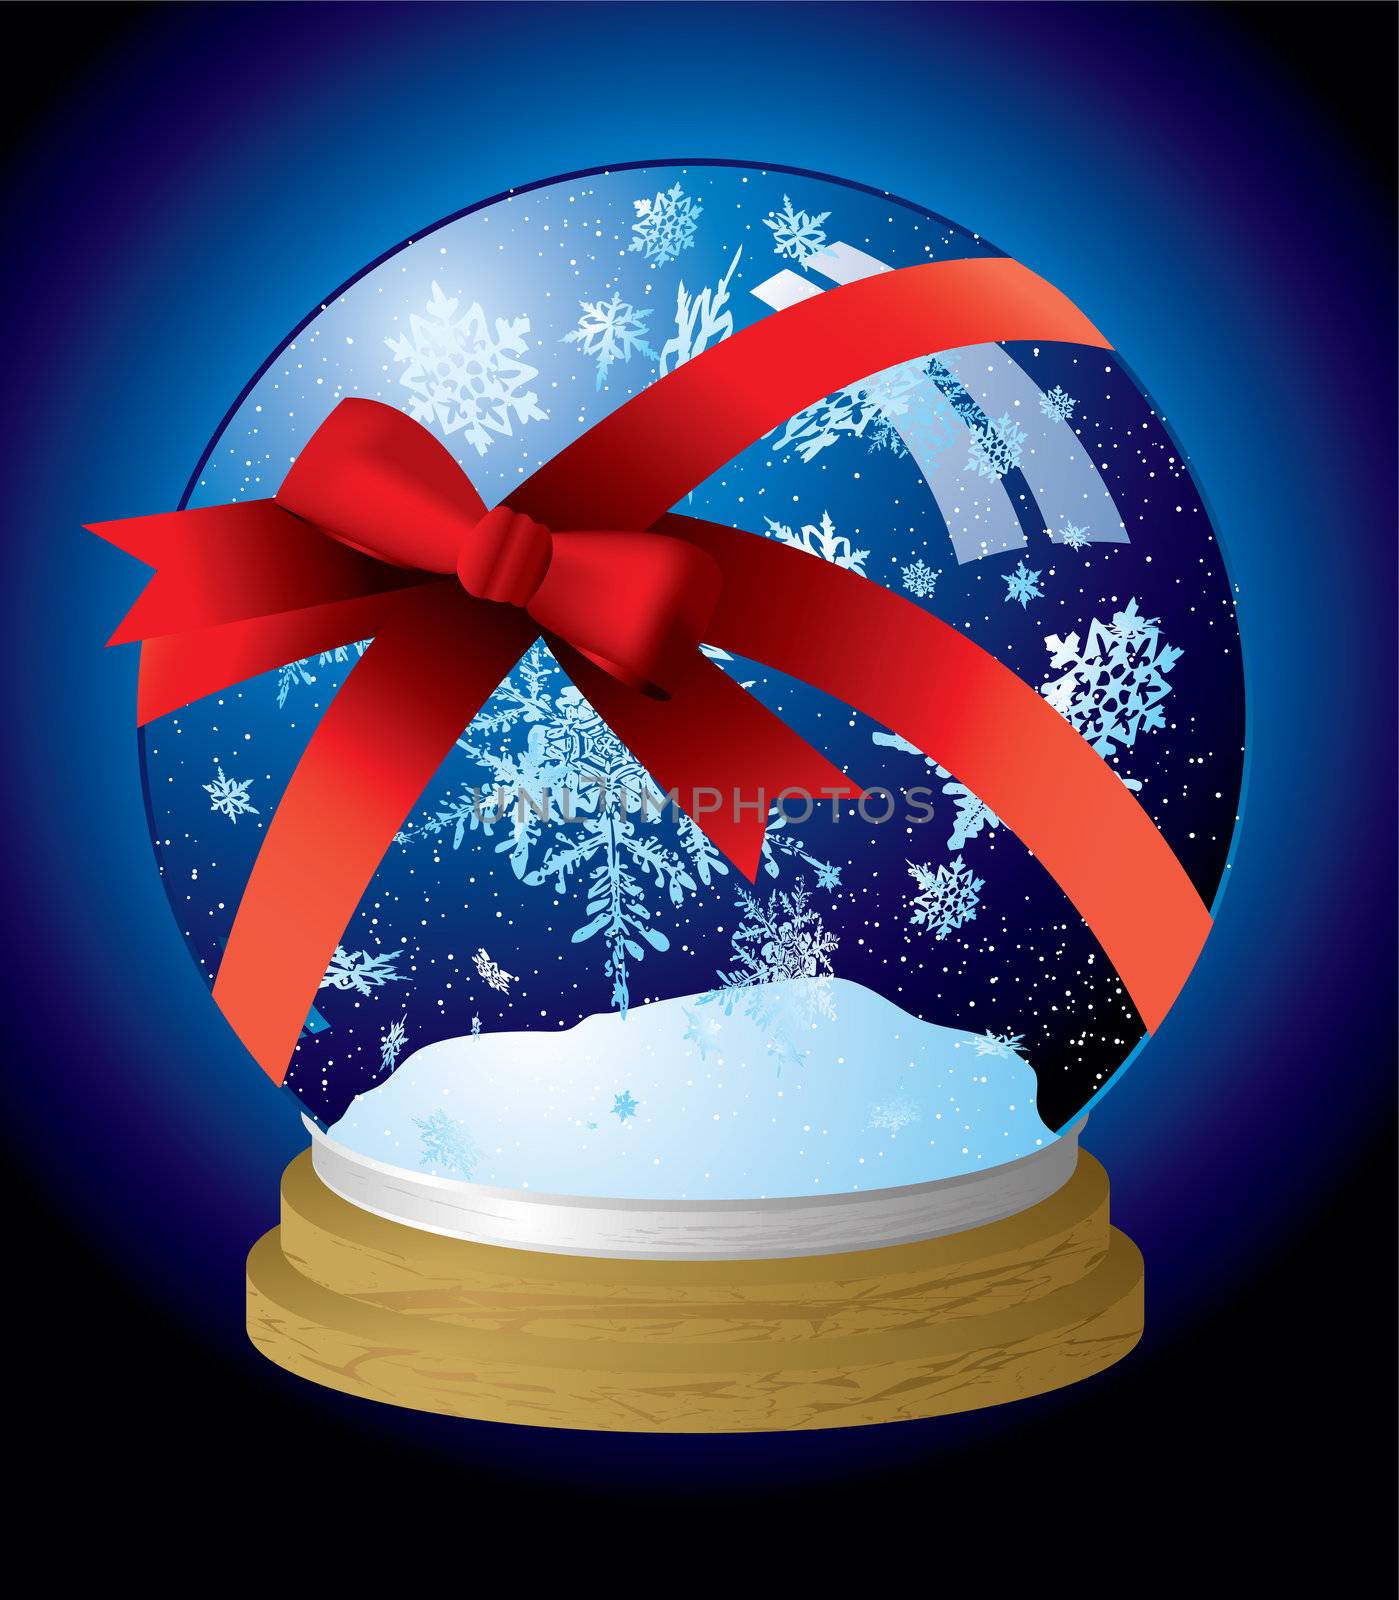 Illustrated snow globe with a red ribbon present wrapped